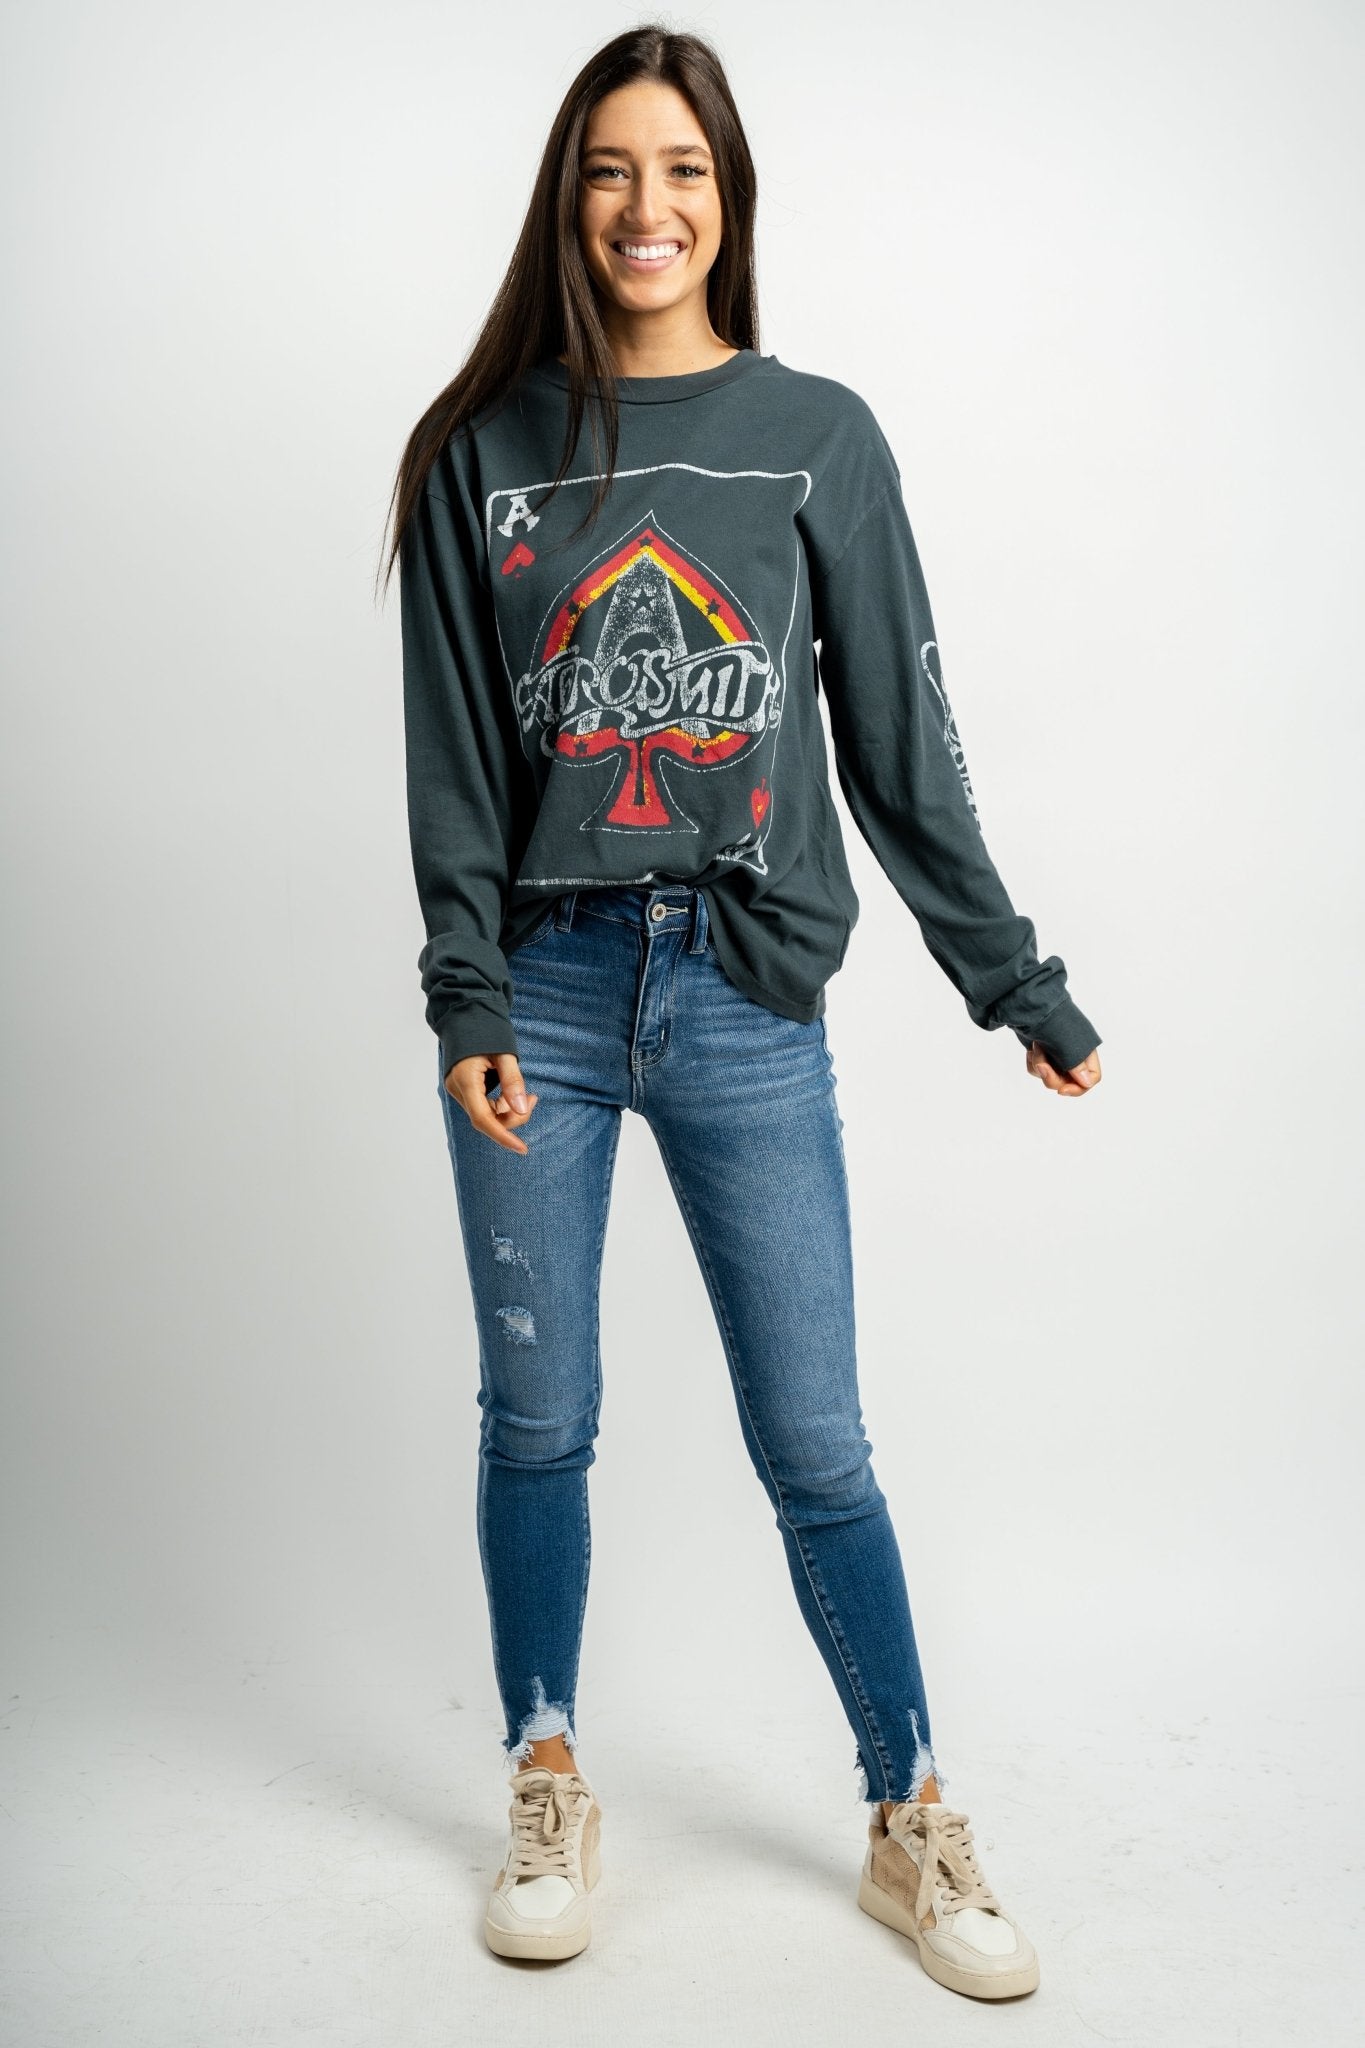 DayDreamer Aerosmith ace of spade long sleeve tee vintage black - Vintage Band T-Shirts and Sweatshirts at Lush Fashion Lounge Boutique in Oklahoma City